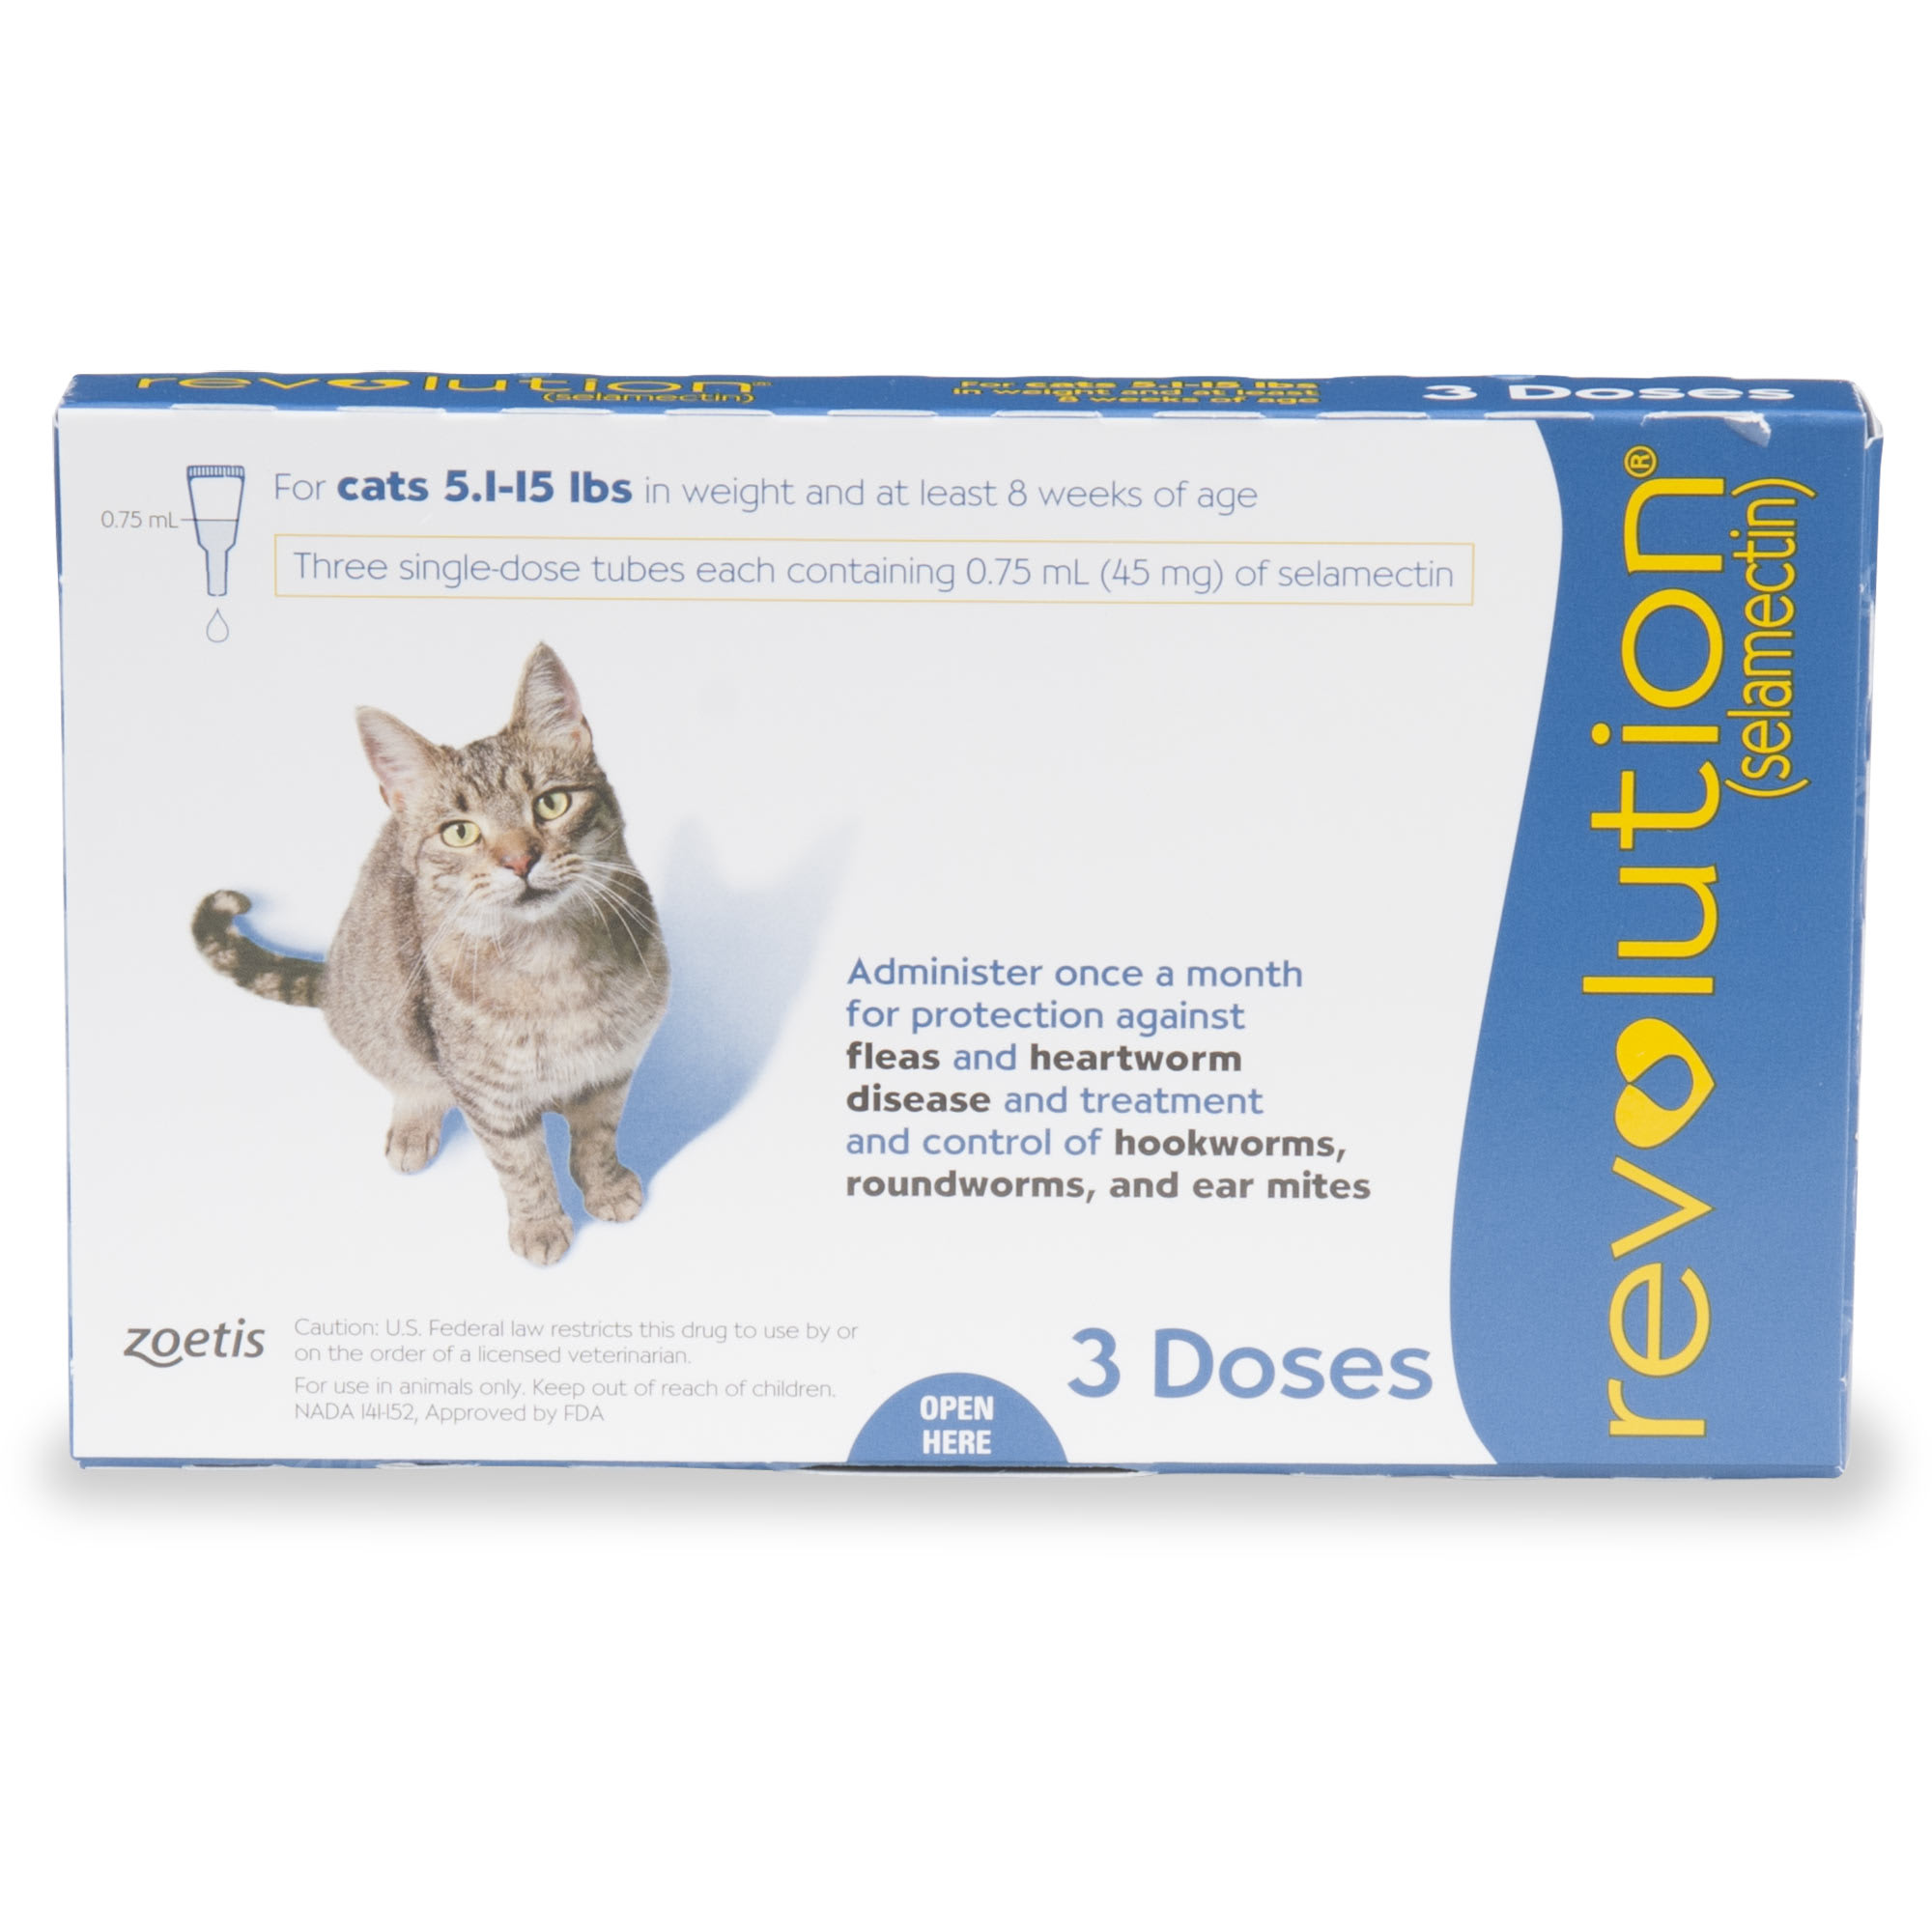 Photos - Dog Medicines & Vitamins Revolution Topical Solution for Cats 5.1-15 lbs, 3 Month Supply 